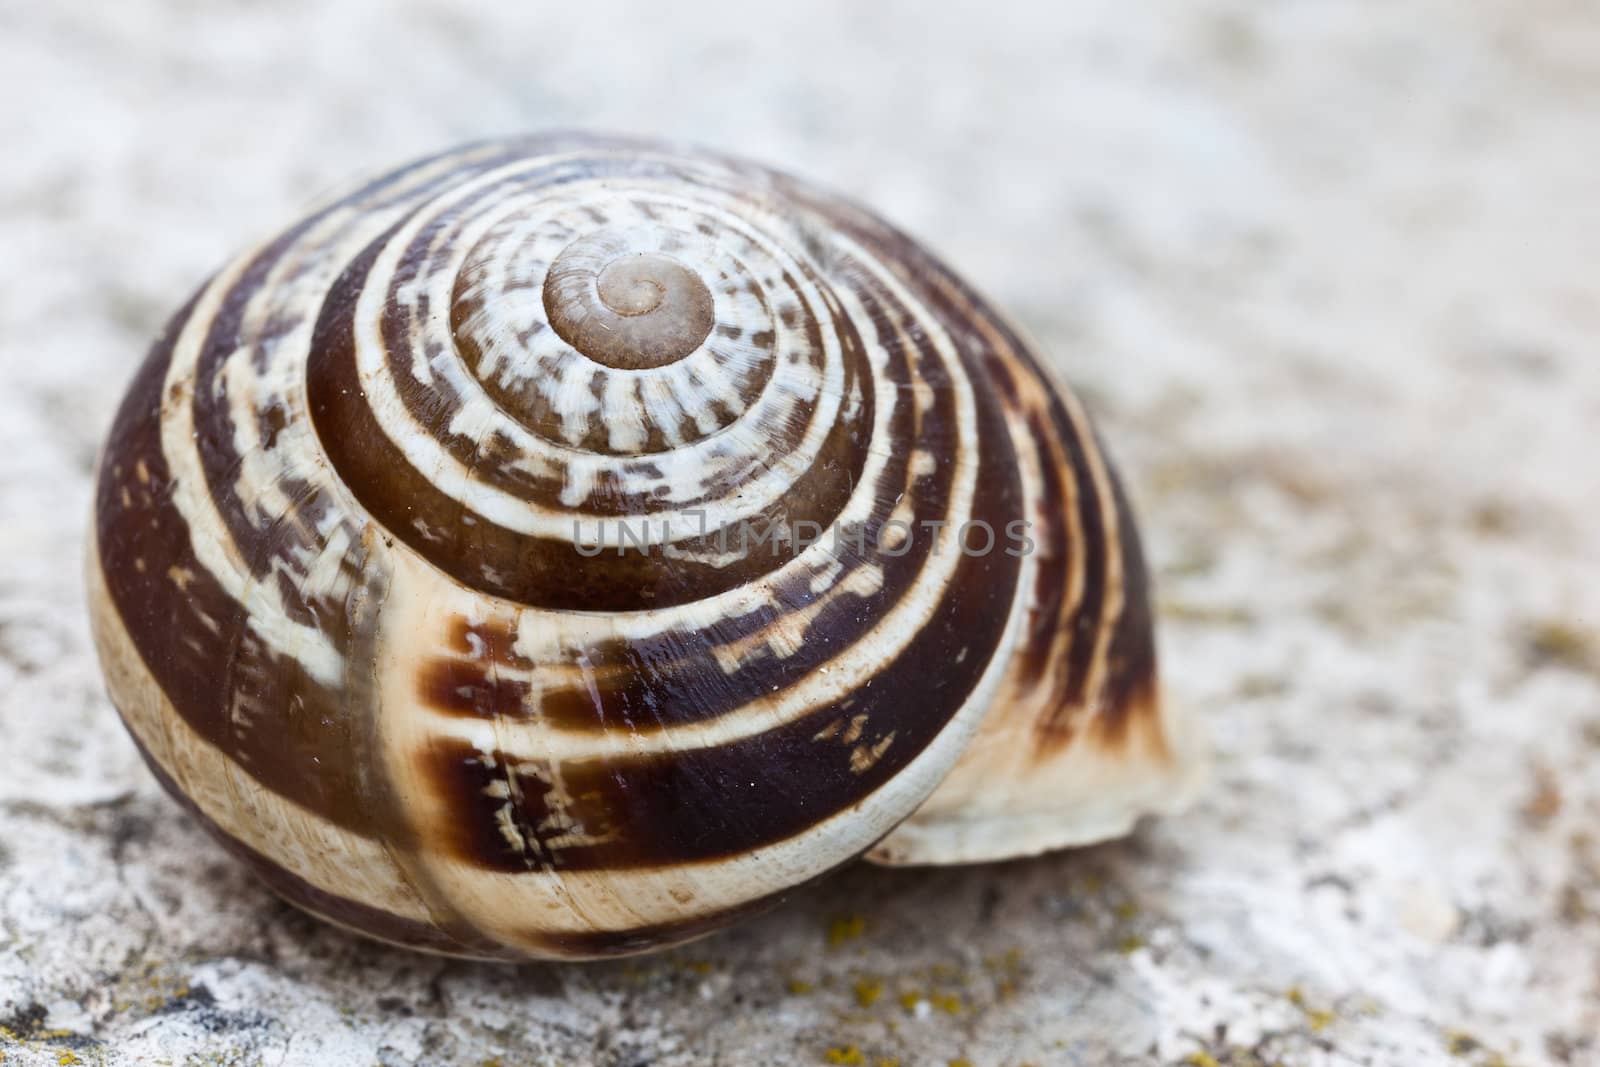 A macro shot of a snail shell. Extremely detailed